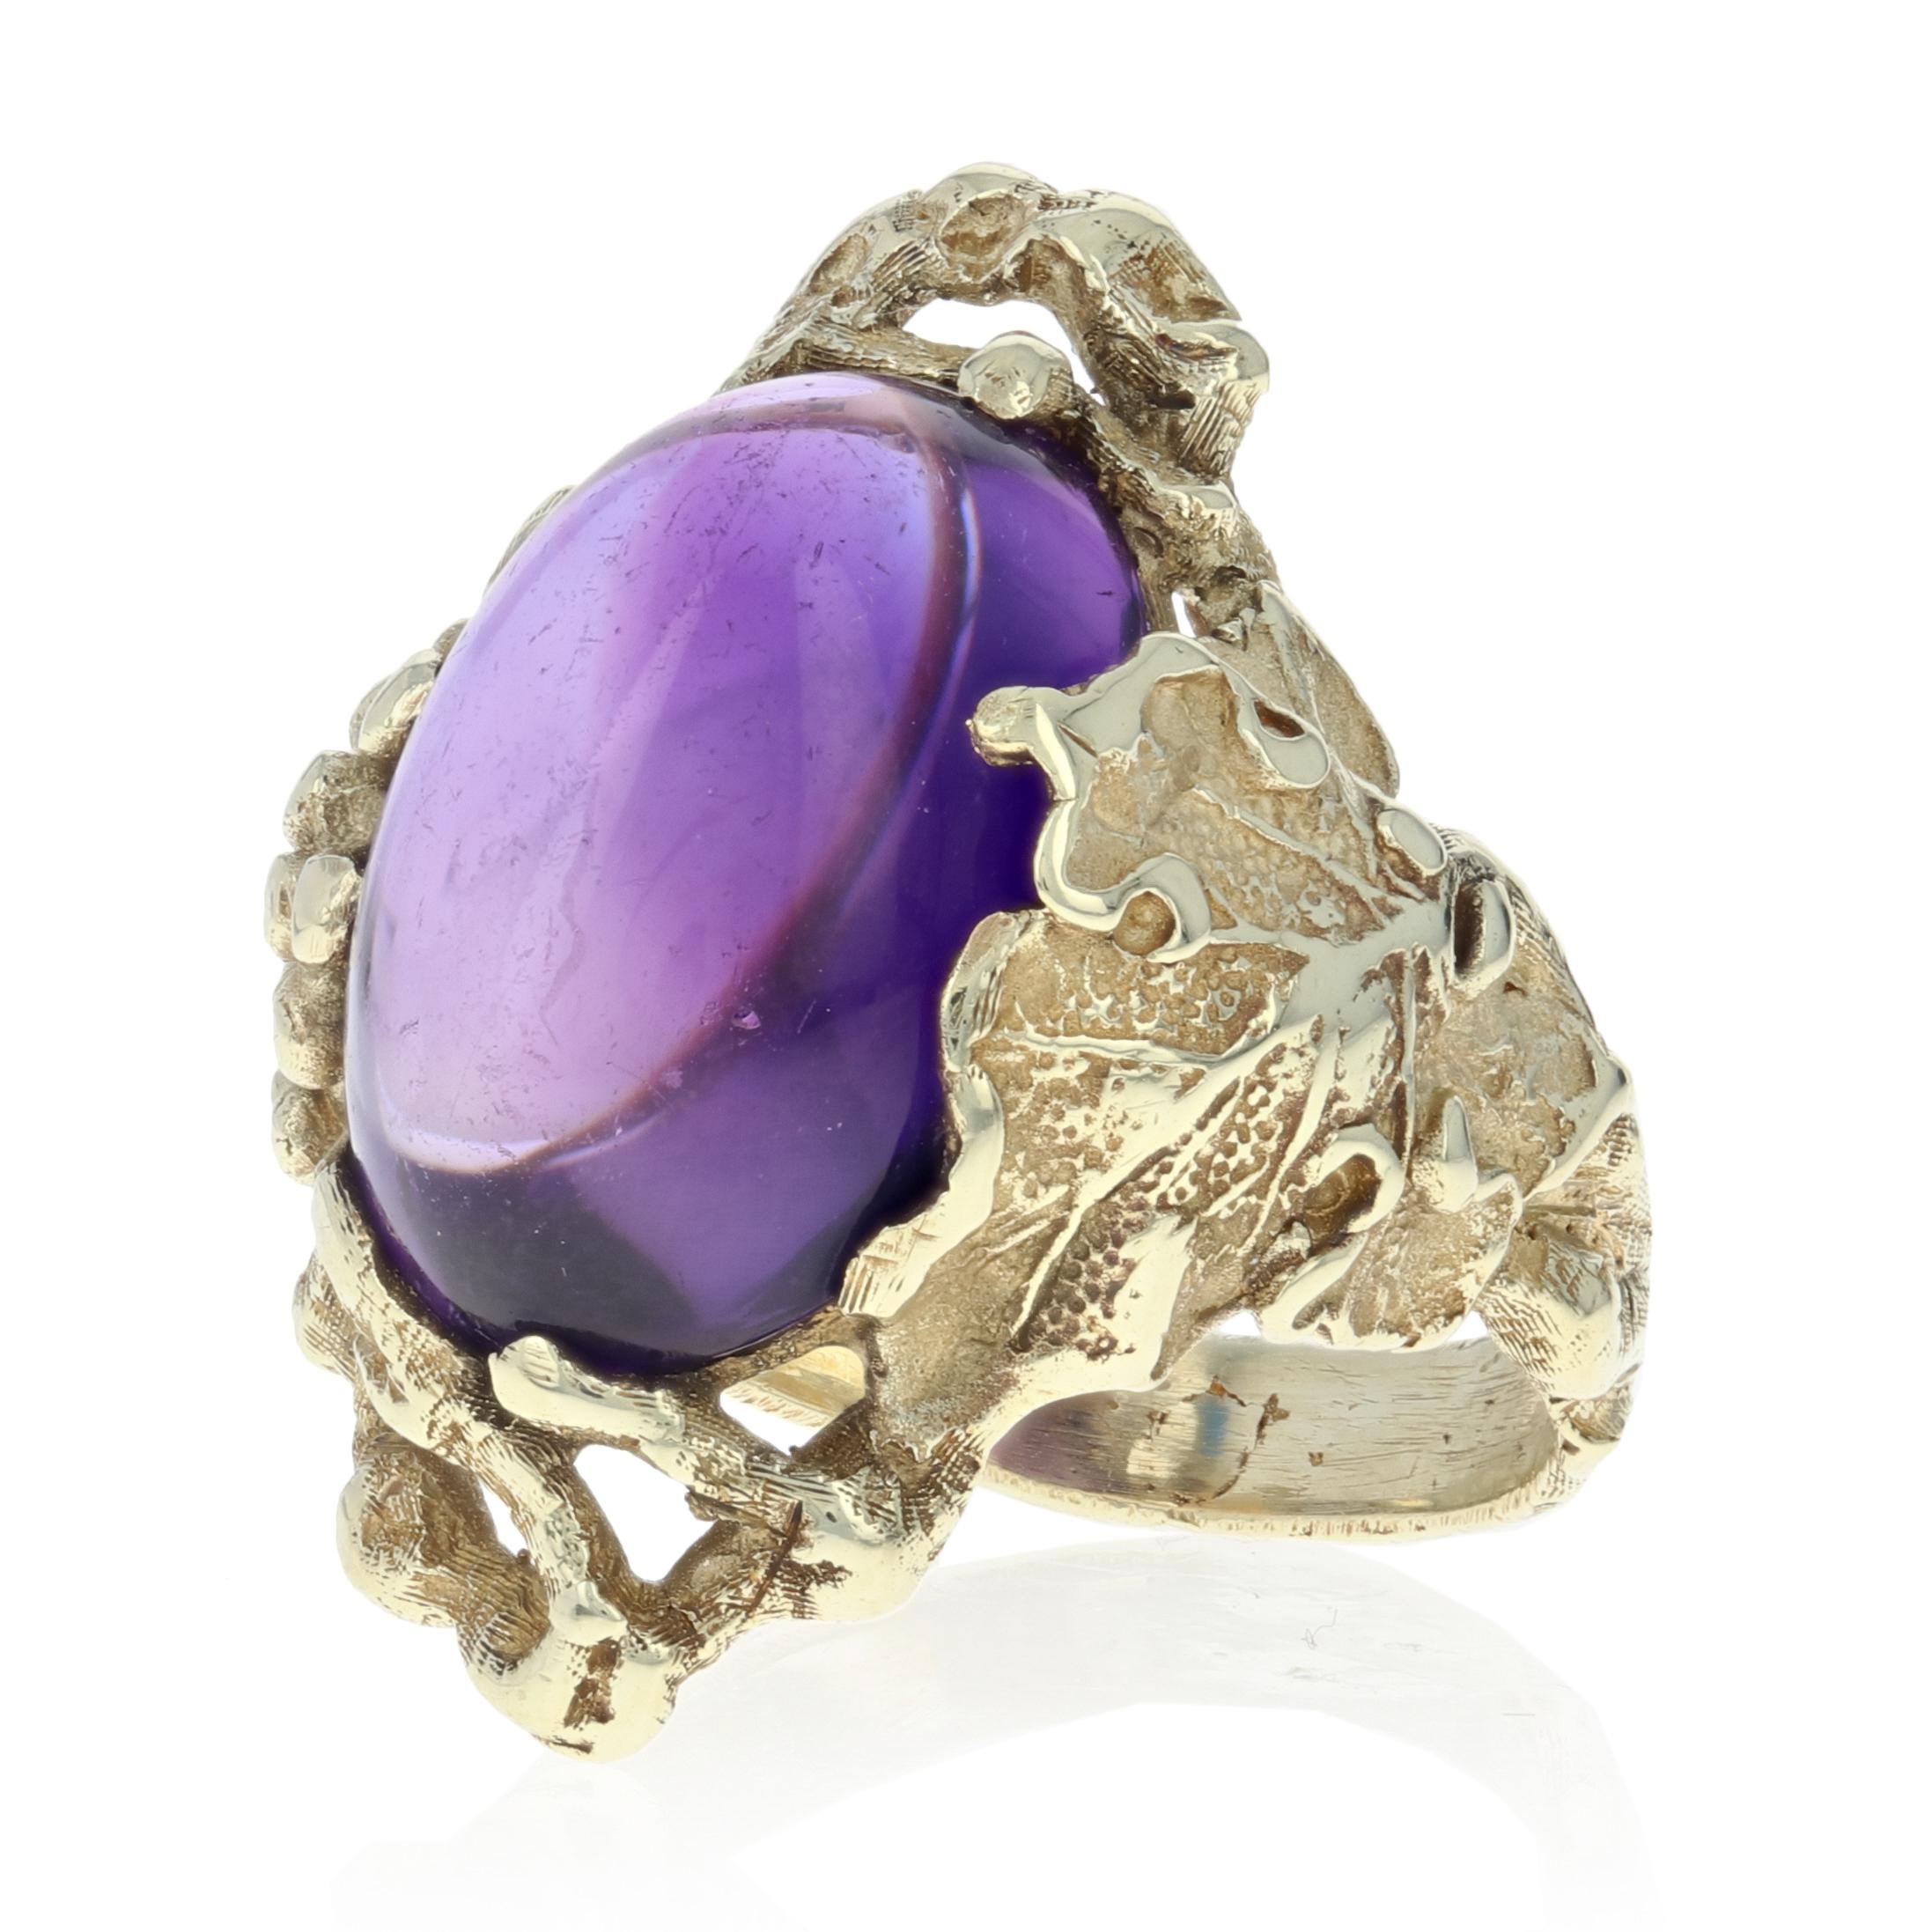 Size: 4
Sizing Fee: Up 2 sizes for a $30 fee

Brand: Walton & Co.
Era: Arts & Crafts 1930s - 1940s

Metal Content: Guaranteed 14k Gold as stamped

Stone Information: 
Genuine Amethyst
Color: Purple  
Cut: Cabochon
Carat: 6.30ct

Style: Cocktail